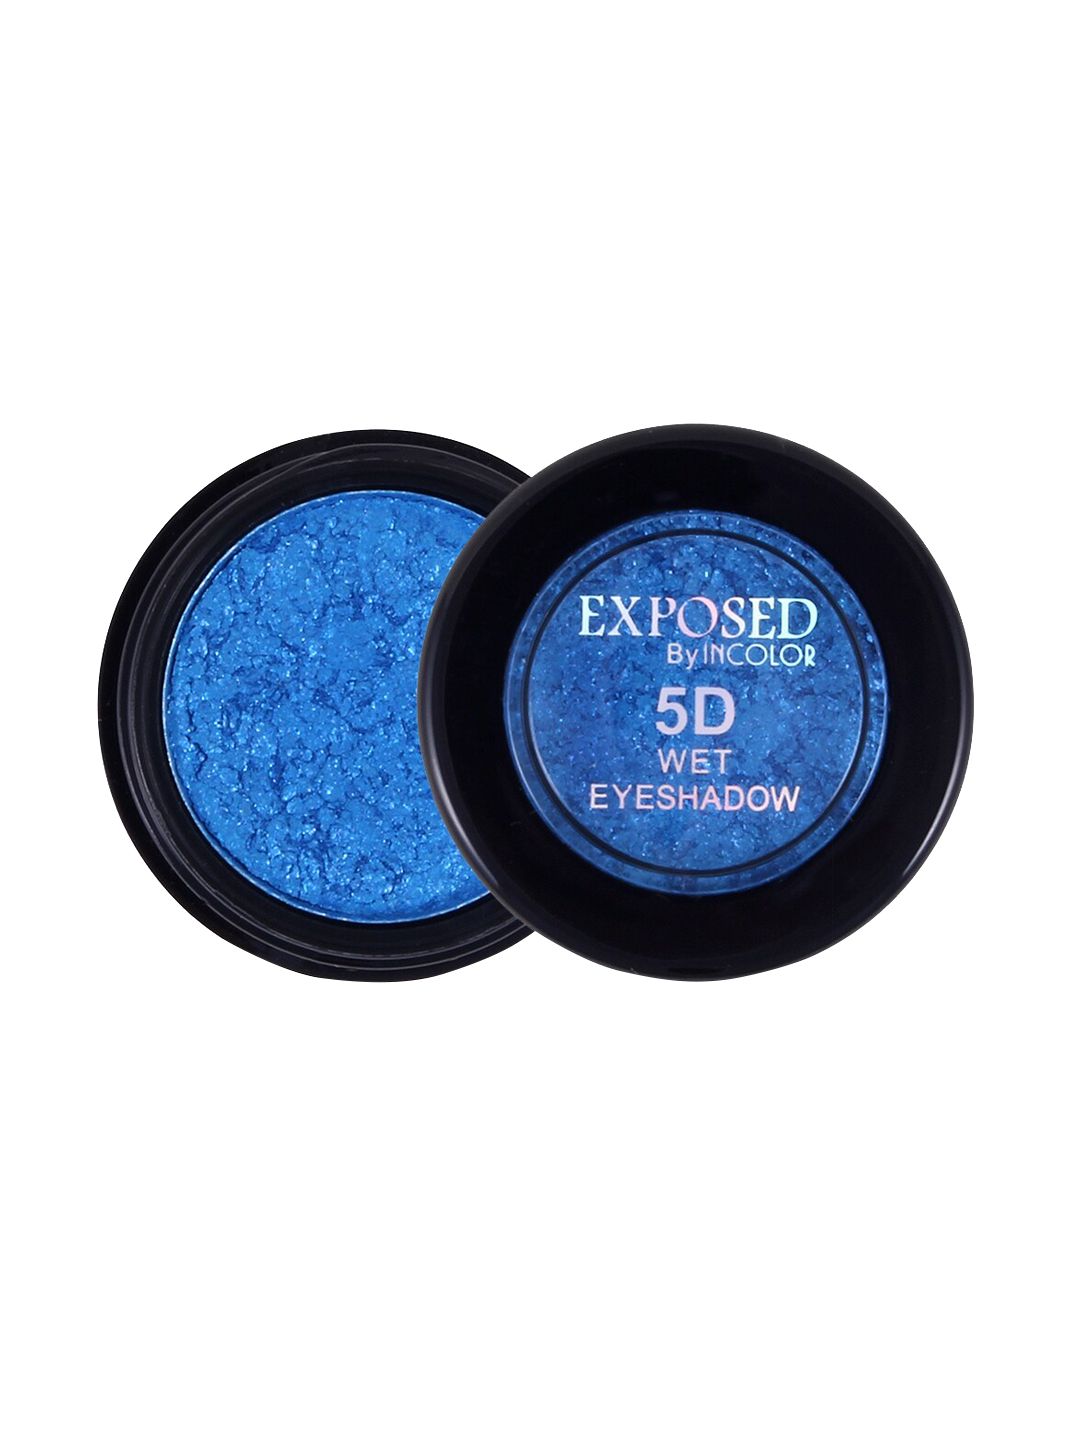 INCOLOR 5 D Wet Eyeshadow 09 4.5 gm Price in India